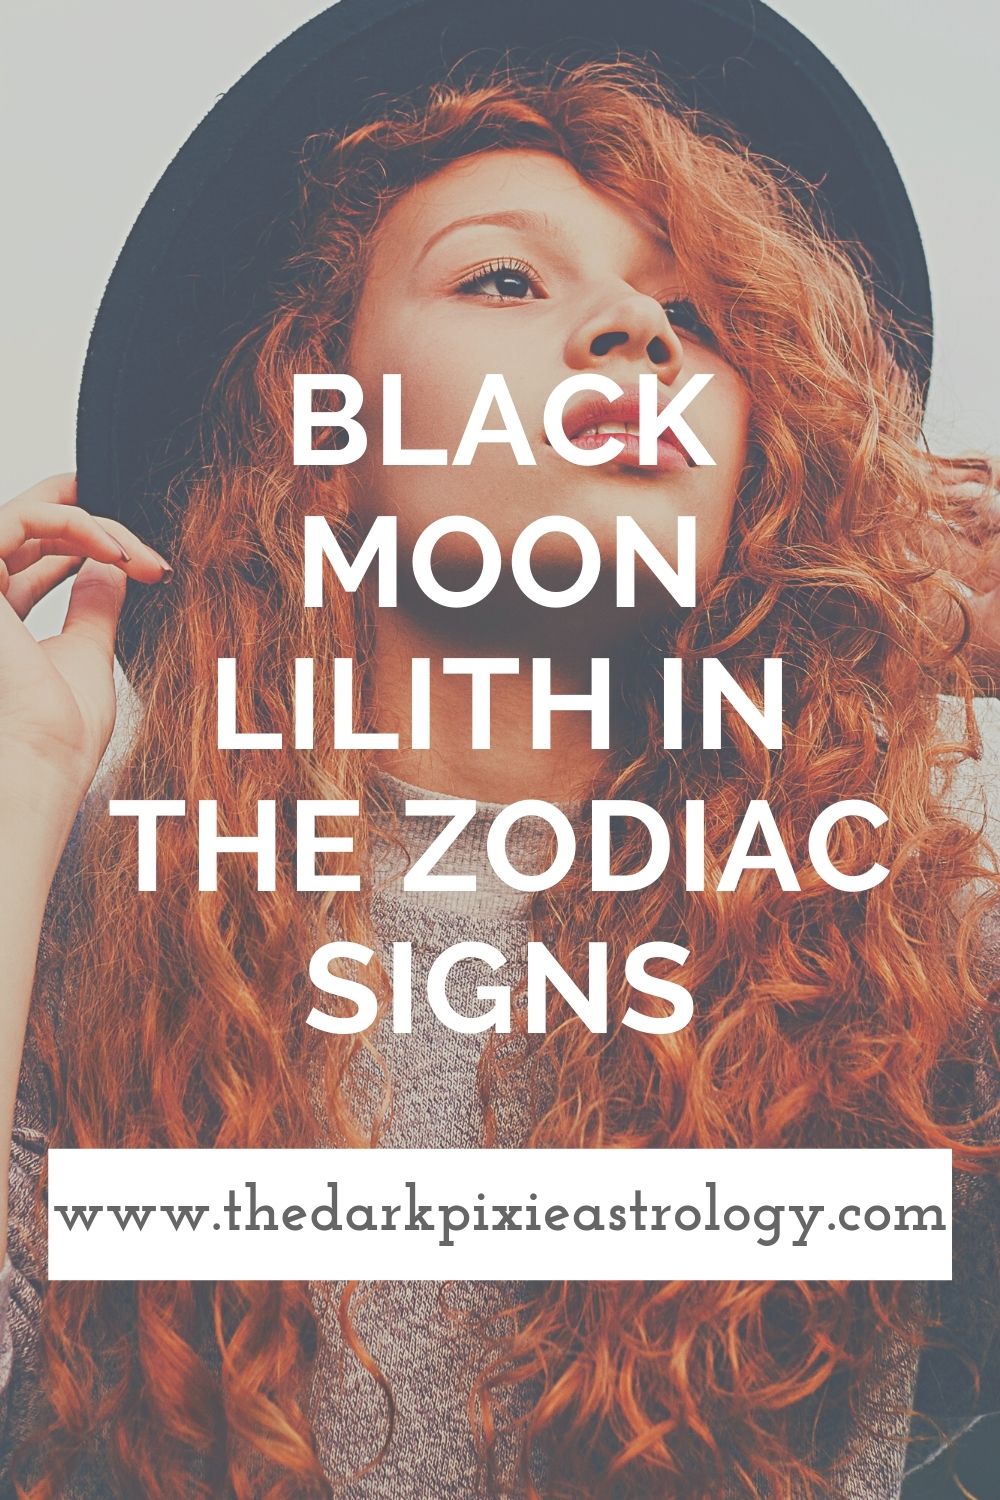 Black Moon Lilith in the Zodiac Signs - The Dark Pixie Astrology